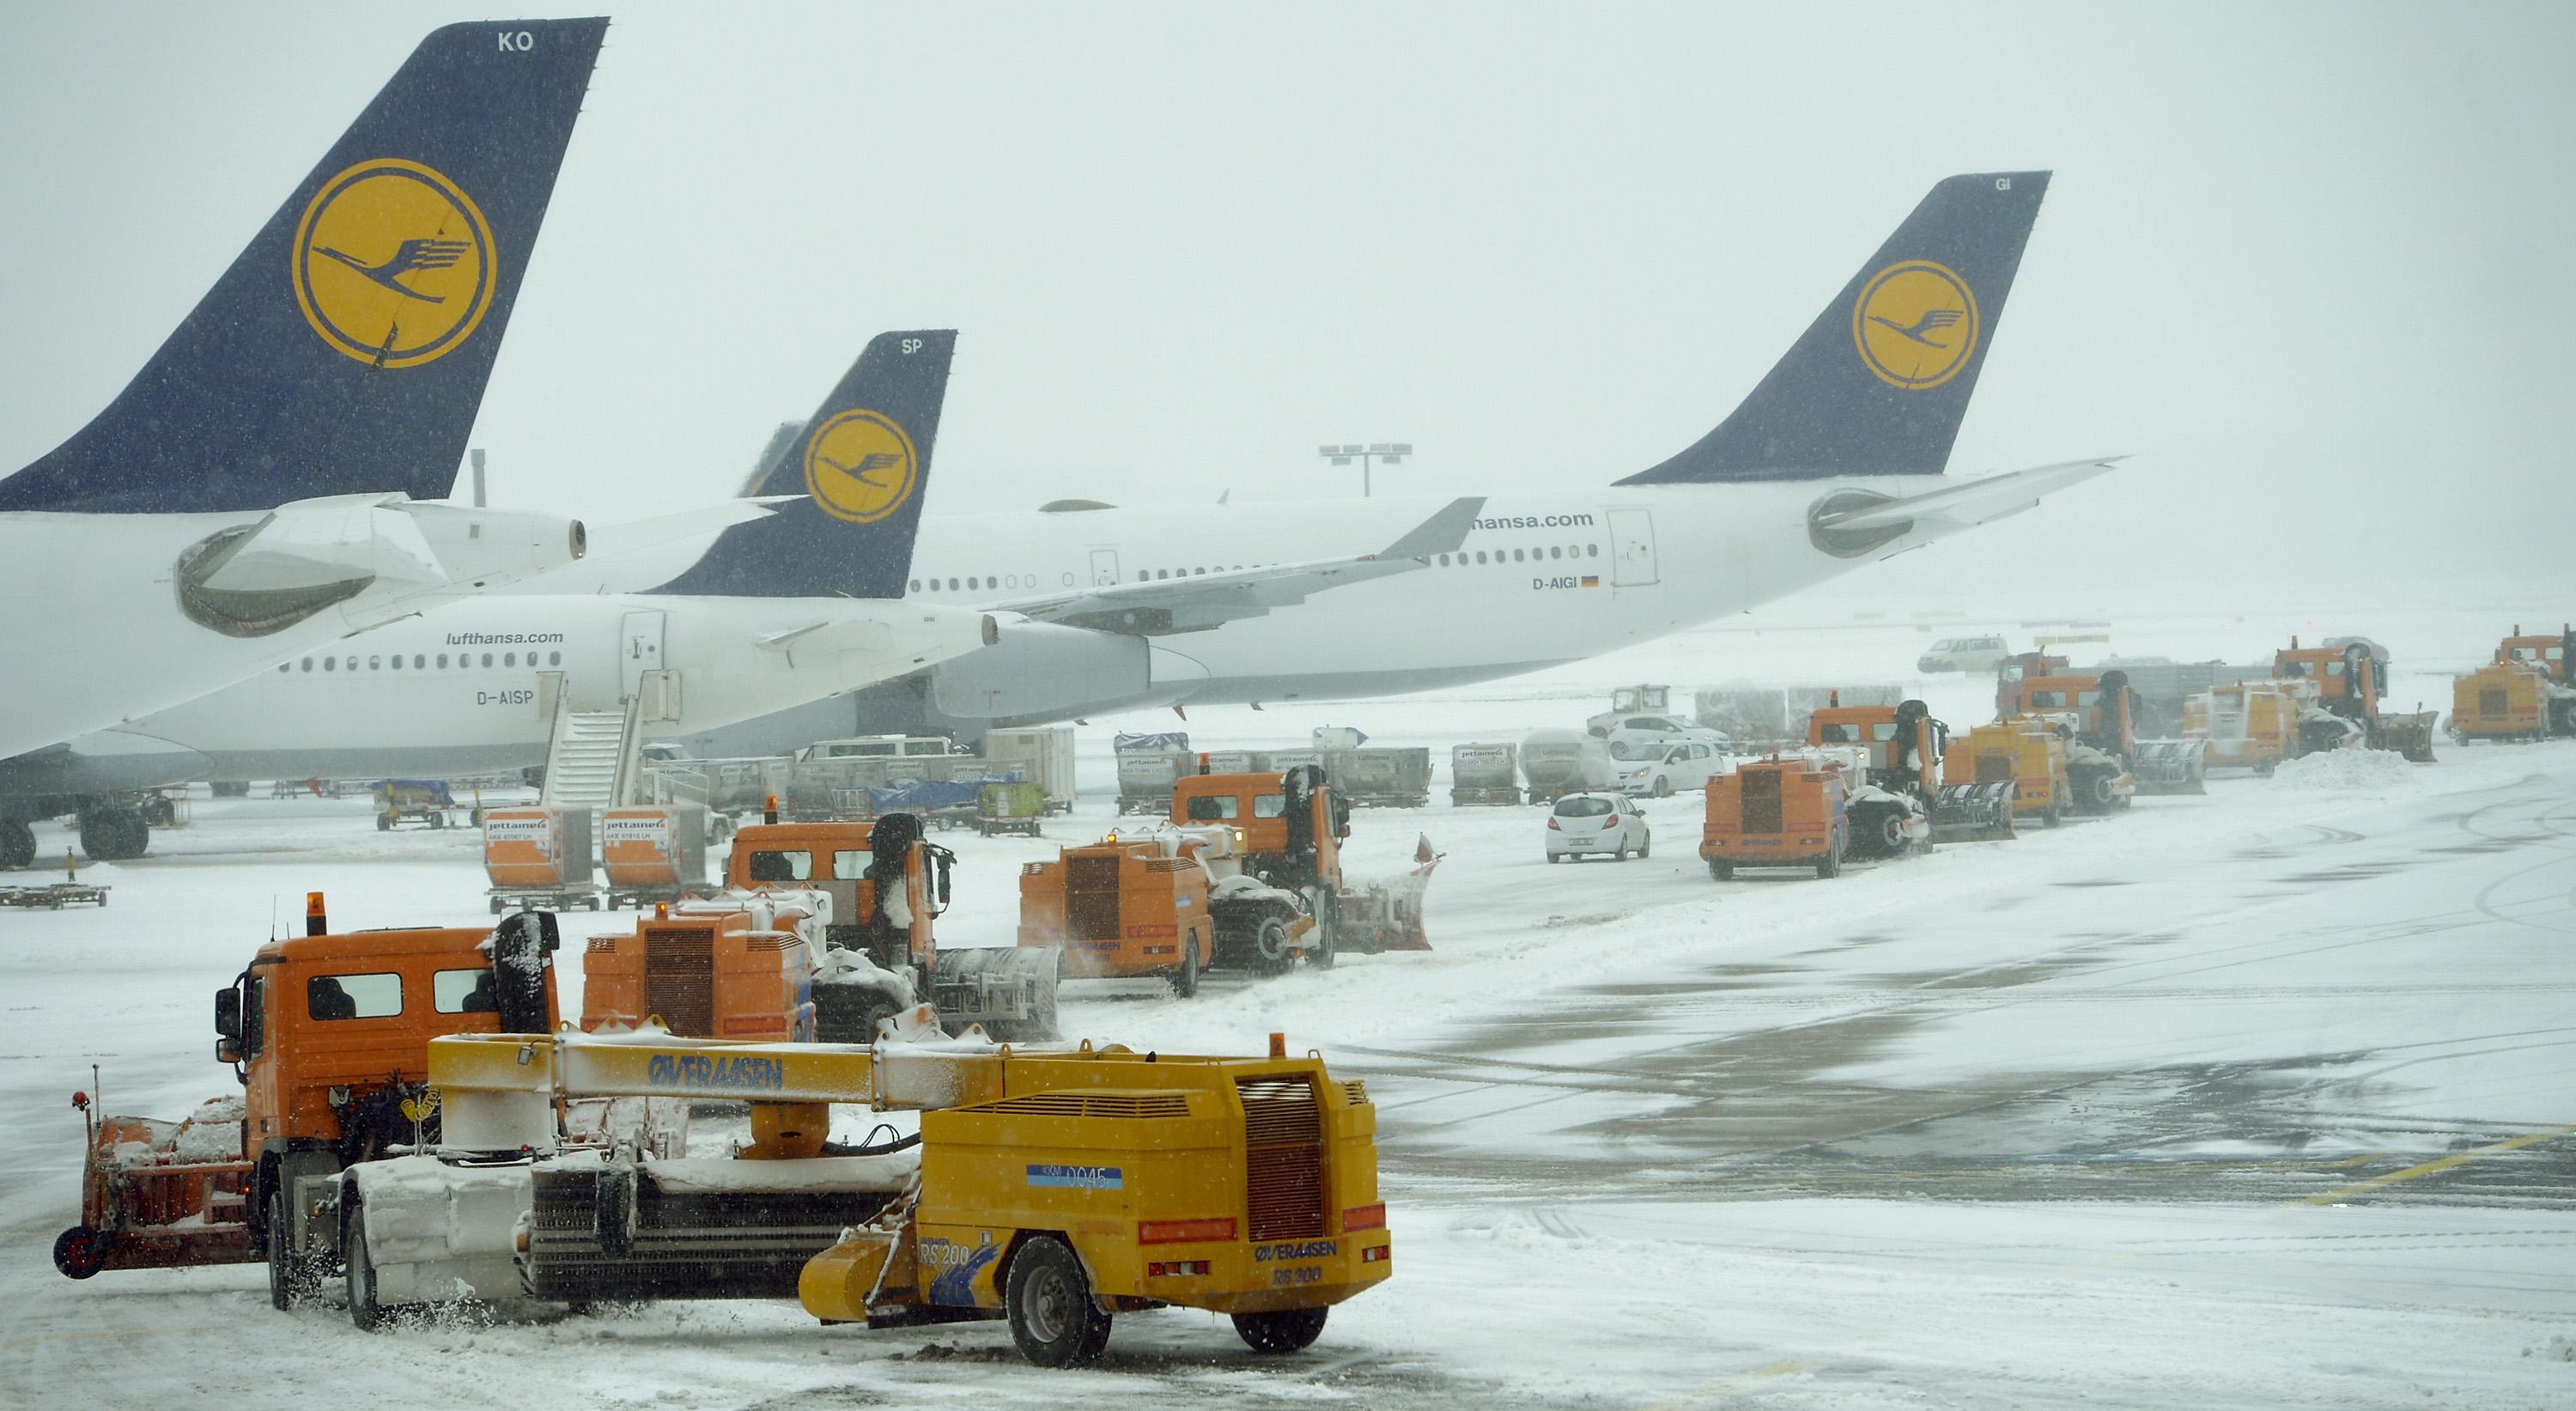 The Cold Facts for Aircraft Maintenance Teams in Extreme Weather